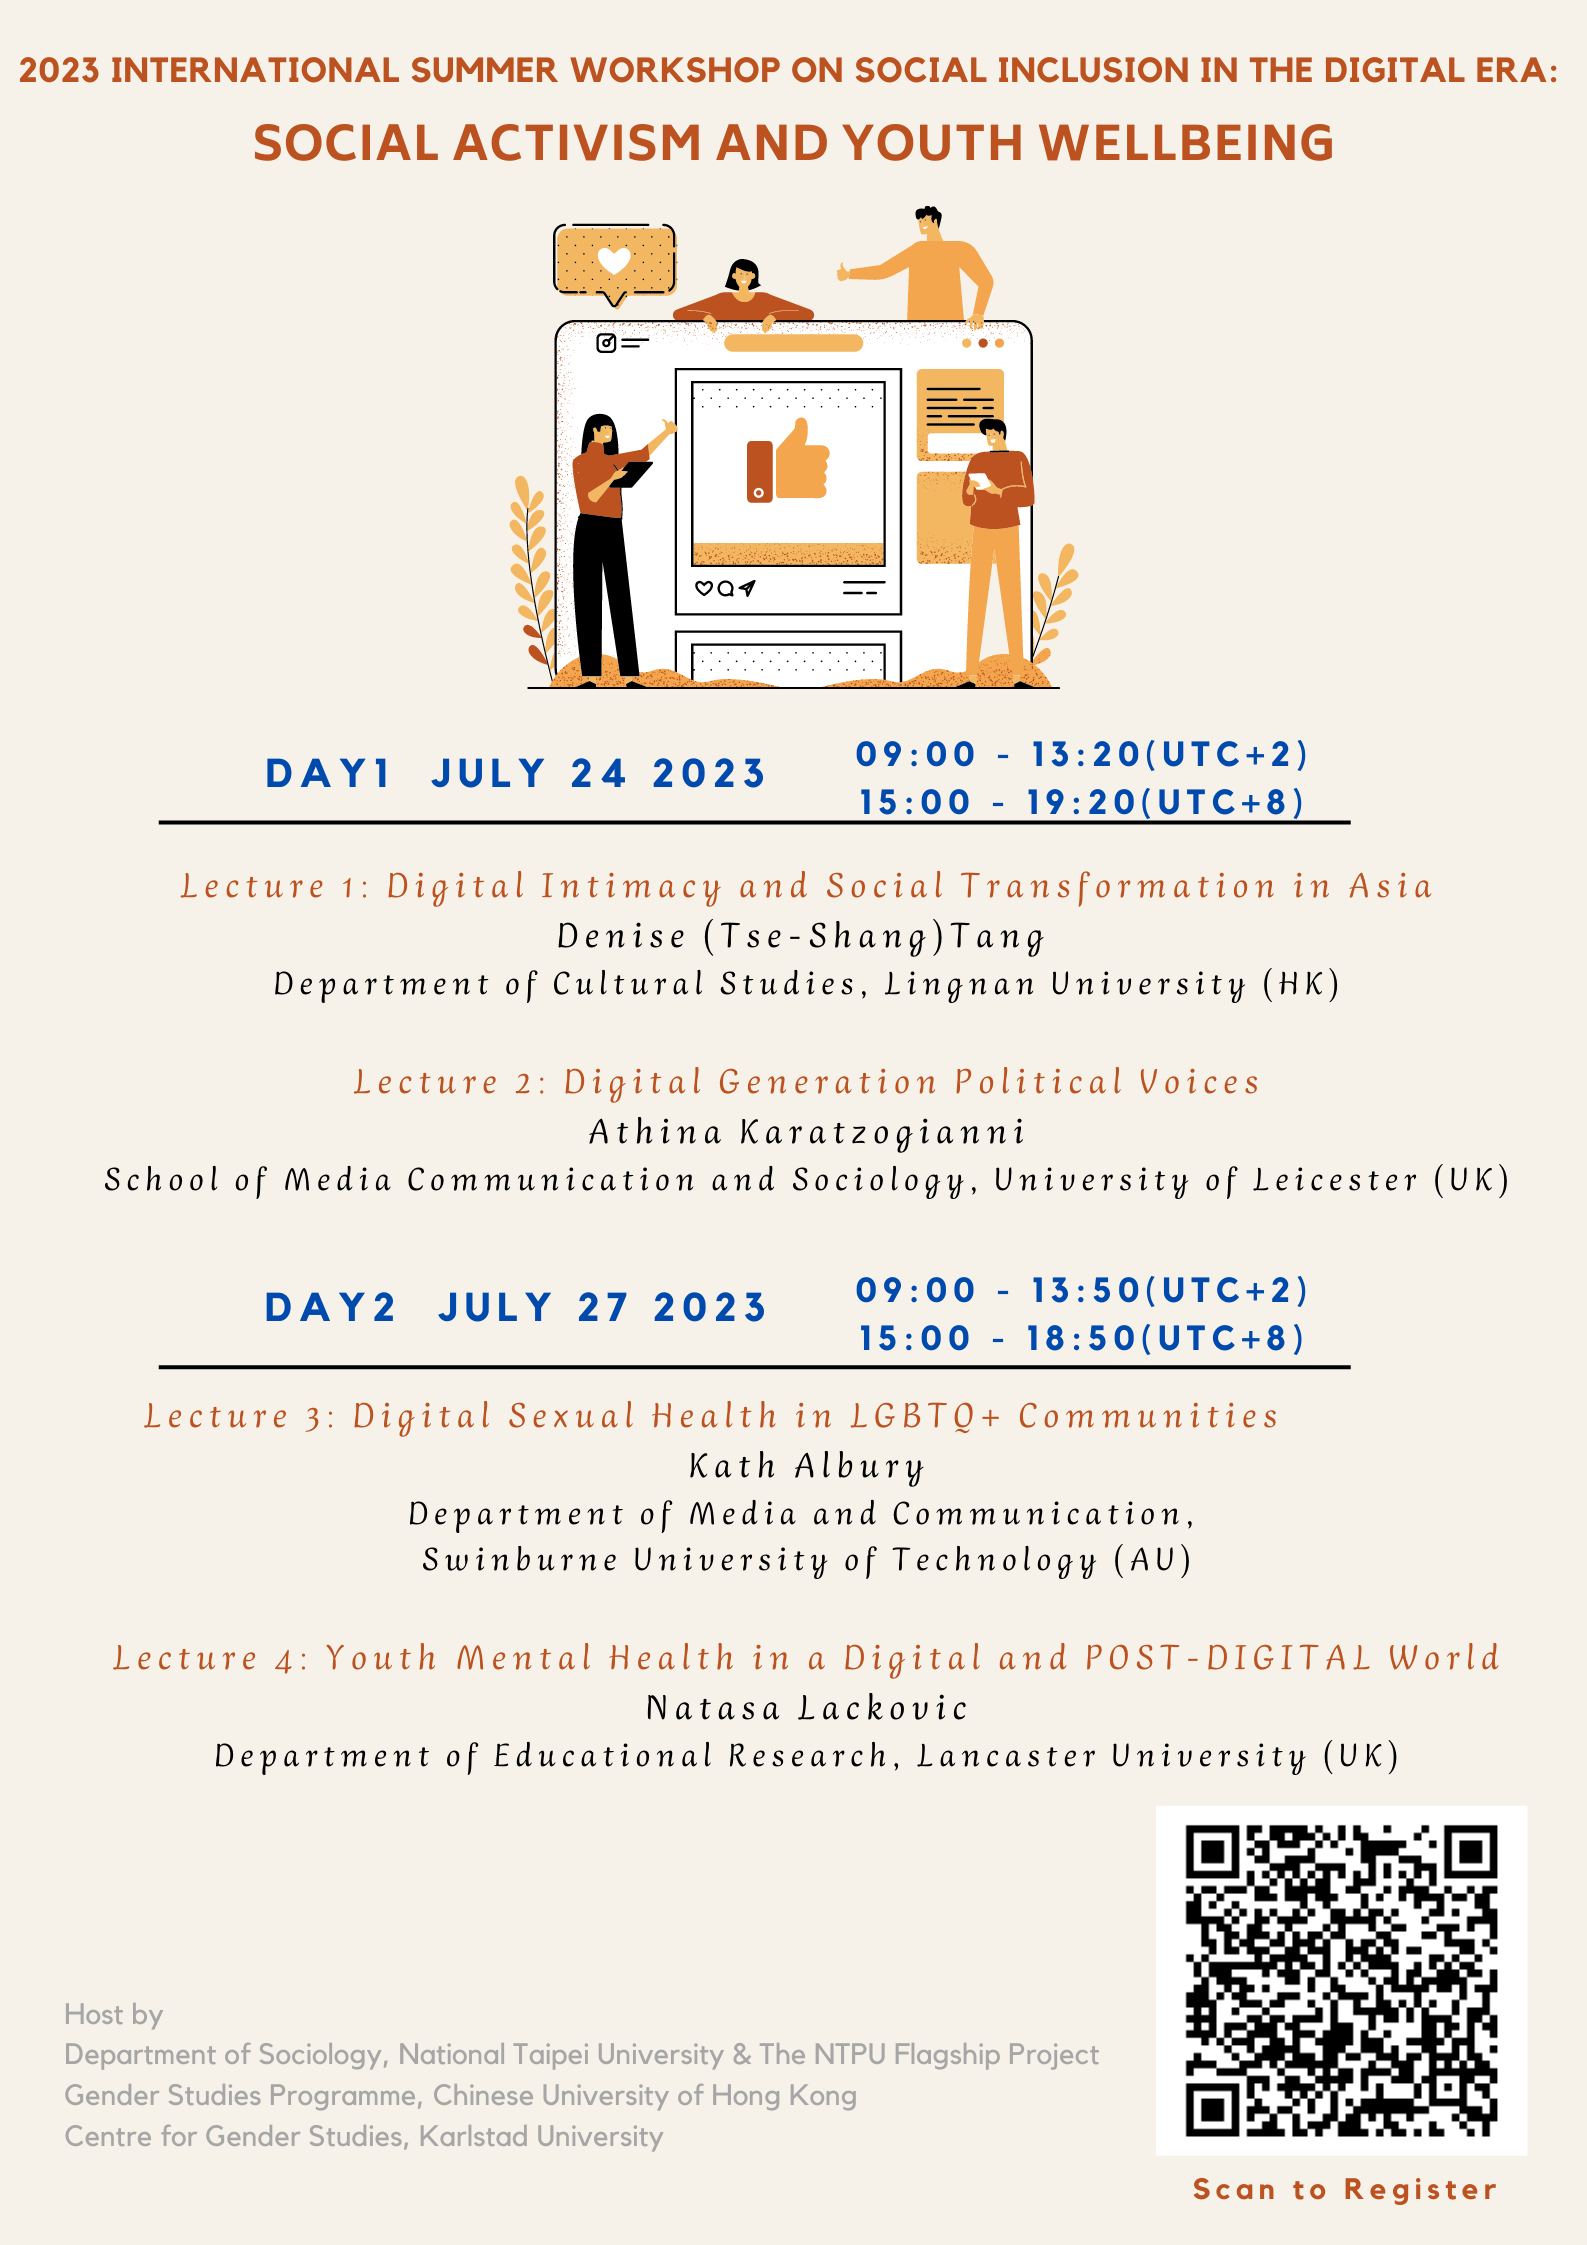 2023 International Summer Workshop on Social Inclusion in the Digital Era Social Activism and Youth Wellbeing 3